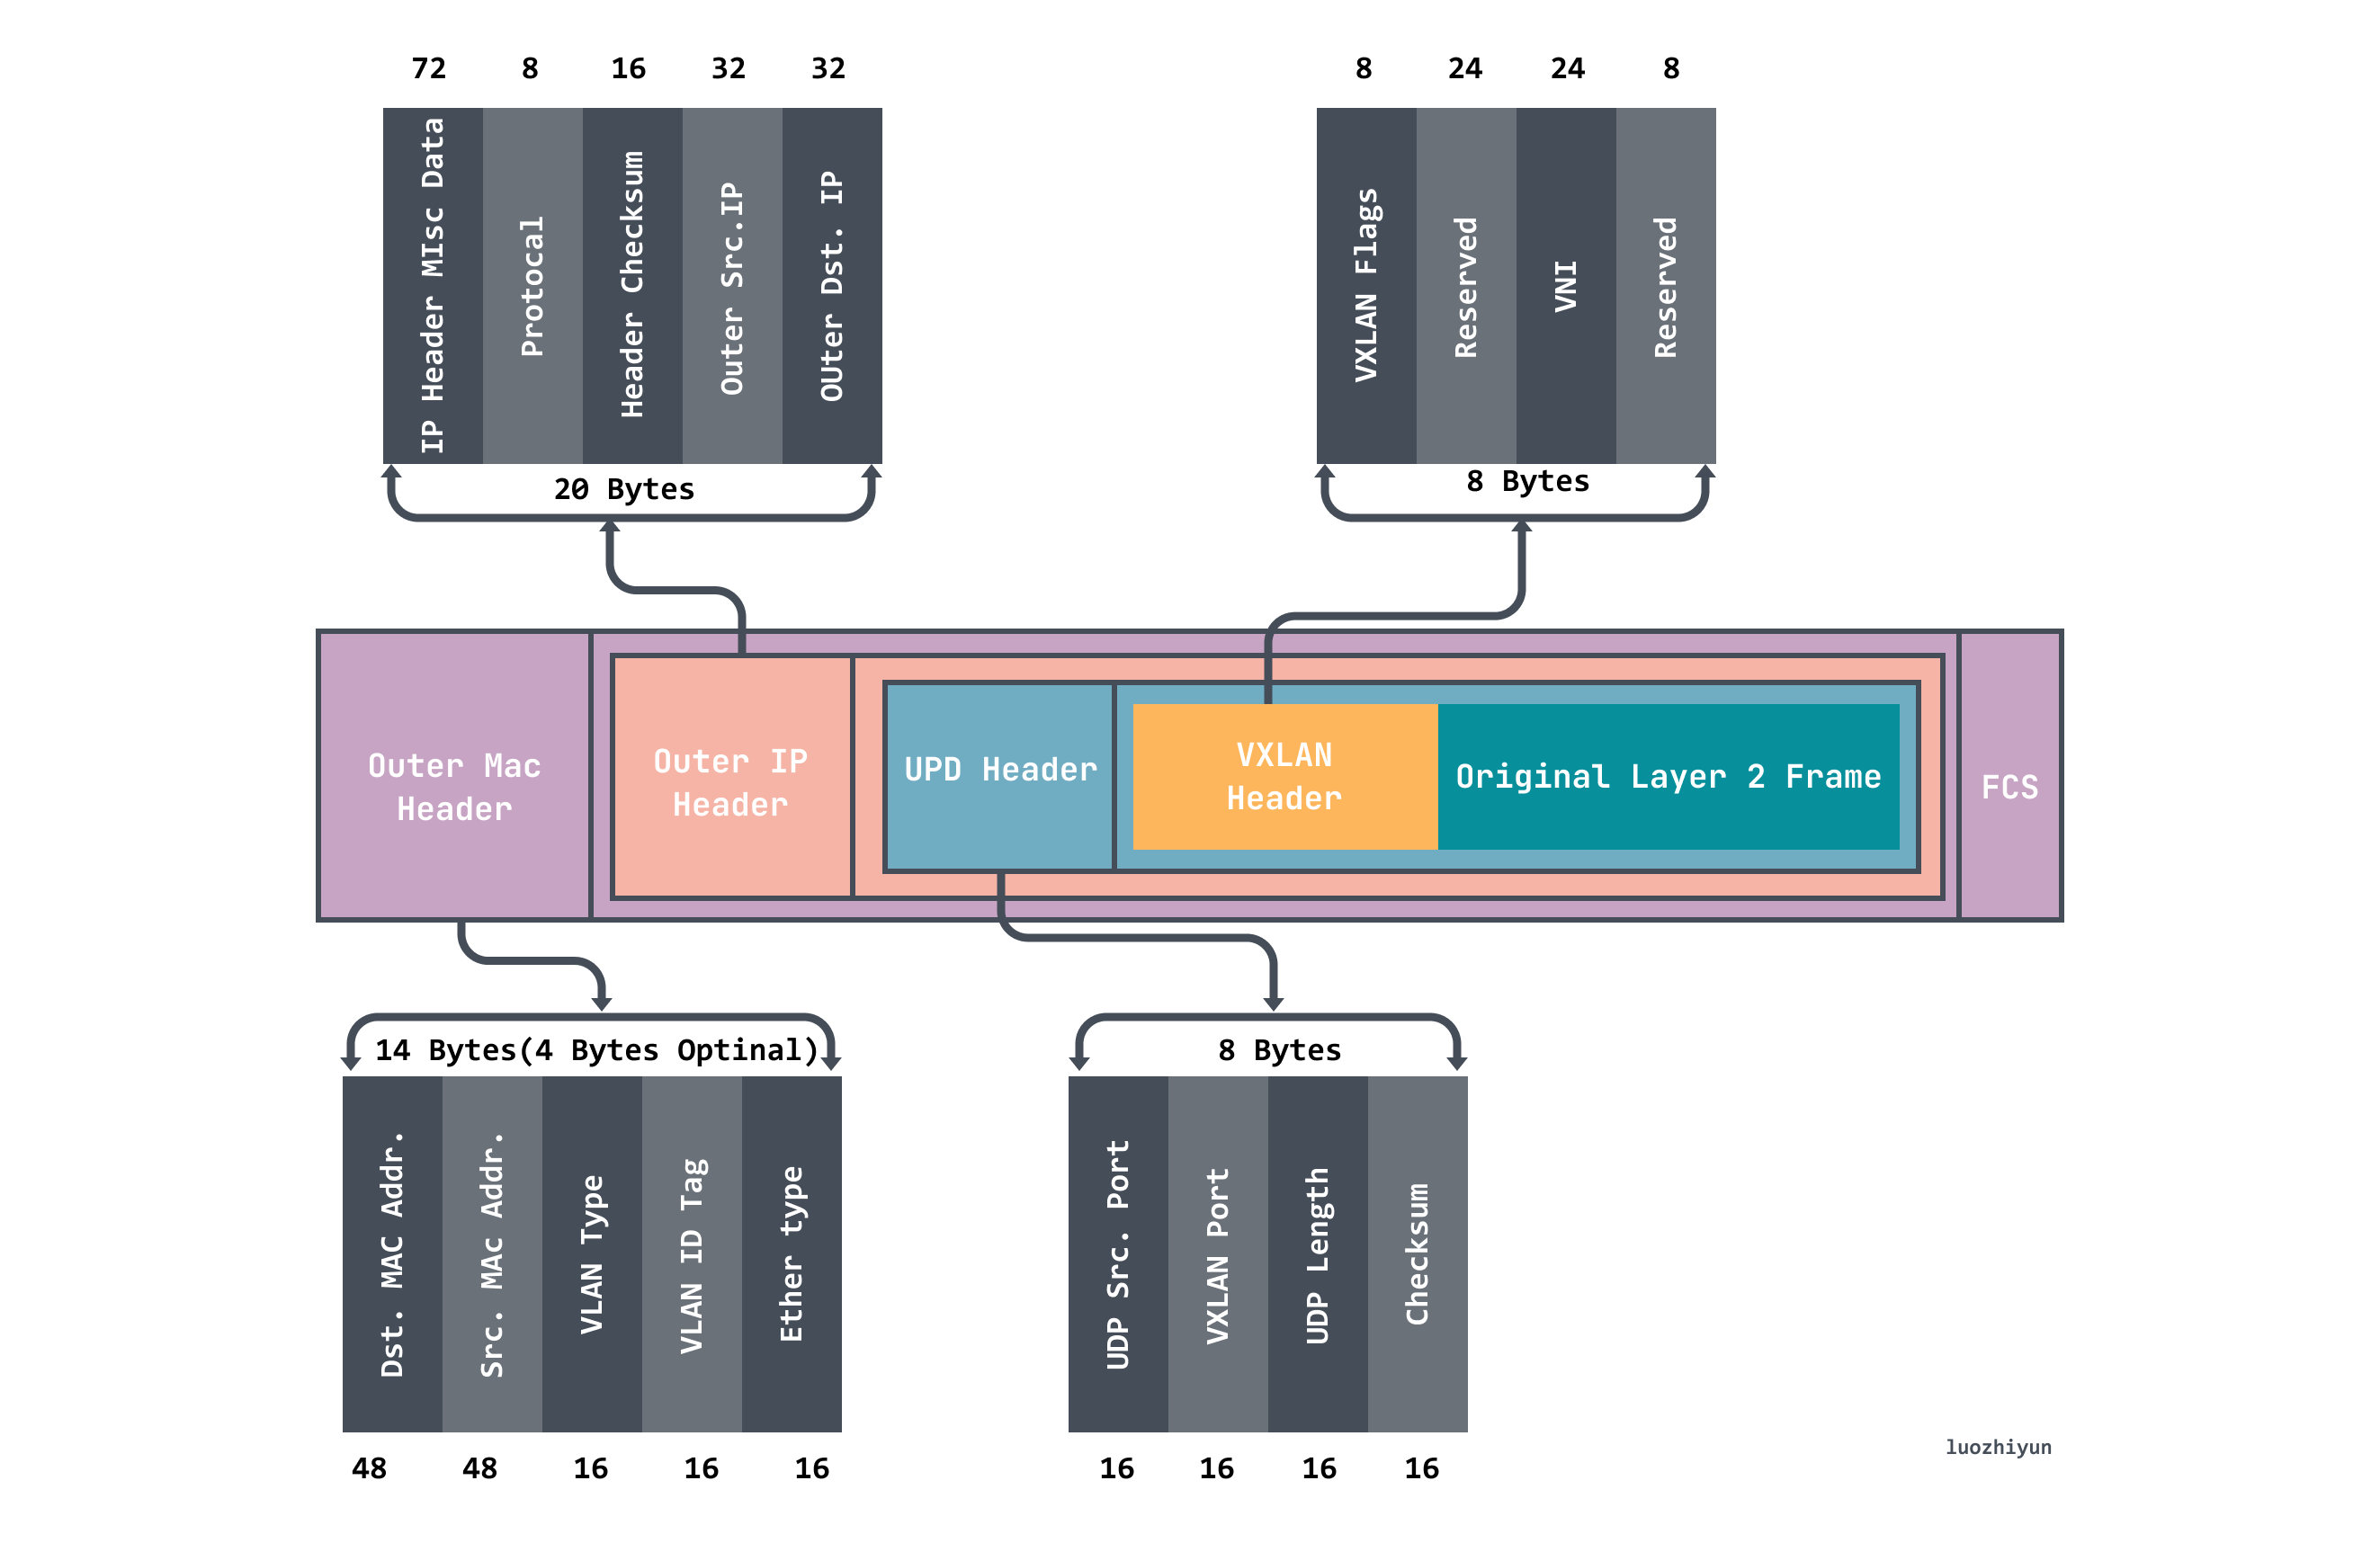 The entire message structure of the VXLAN